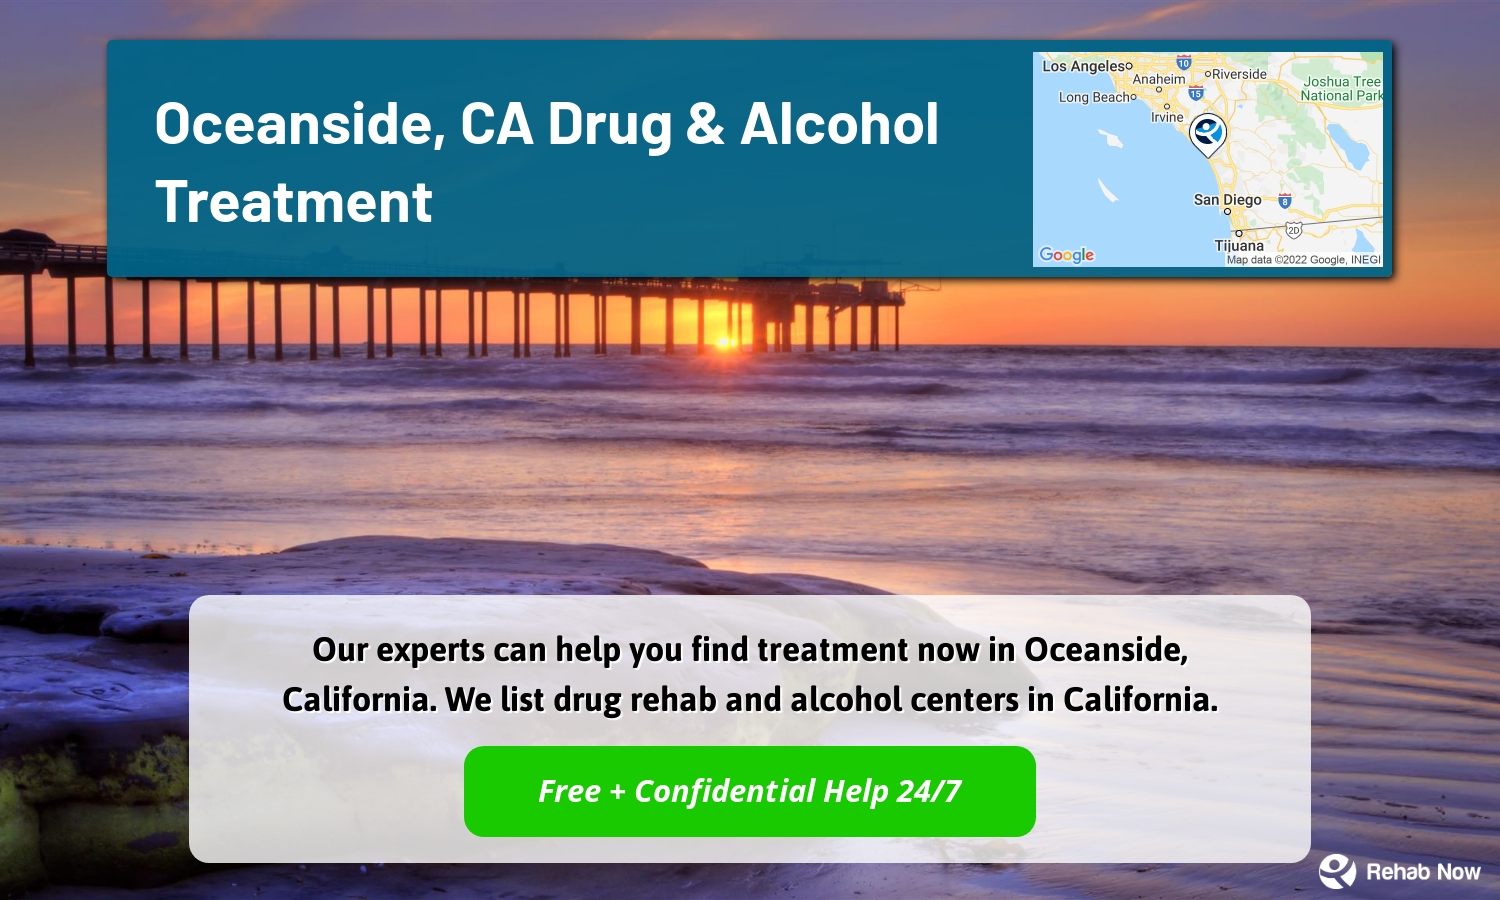 Our experts can help you find treatment now in Oceanside, California. We list drug rehab and alcohol centers in California.